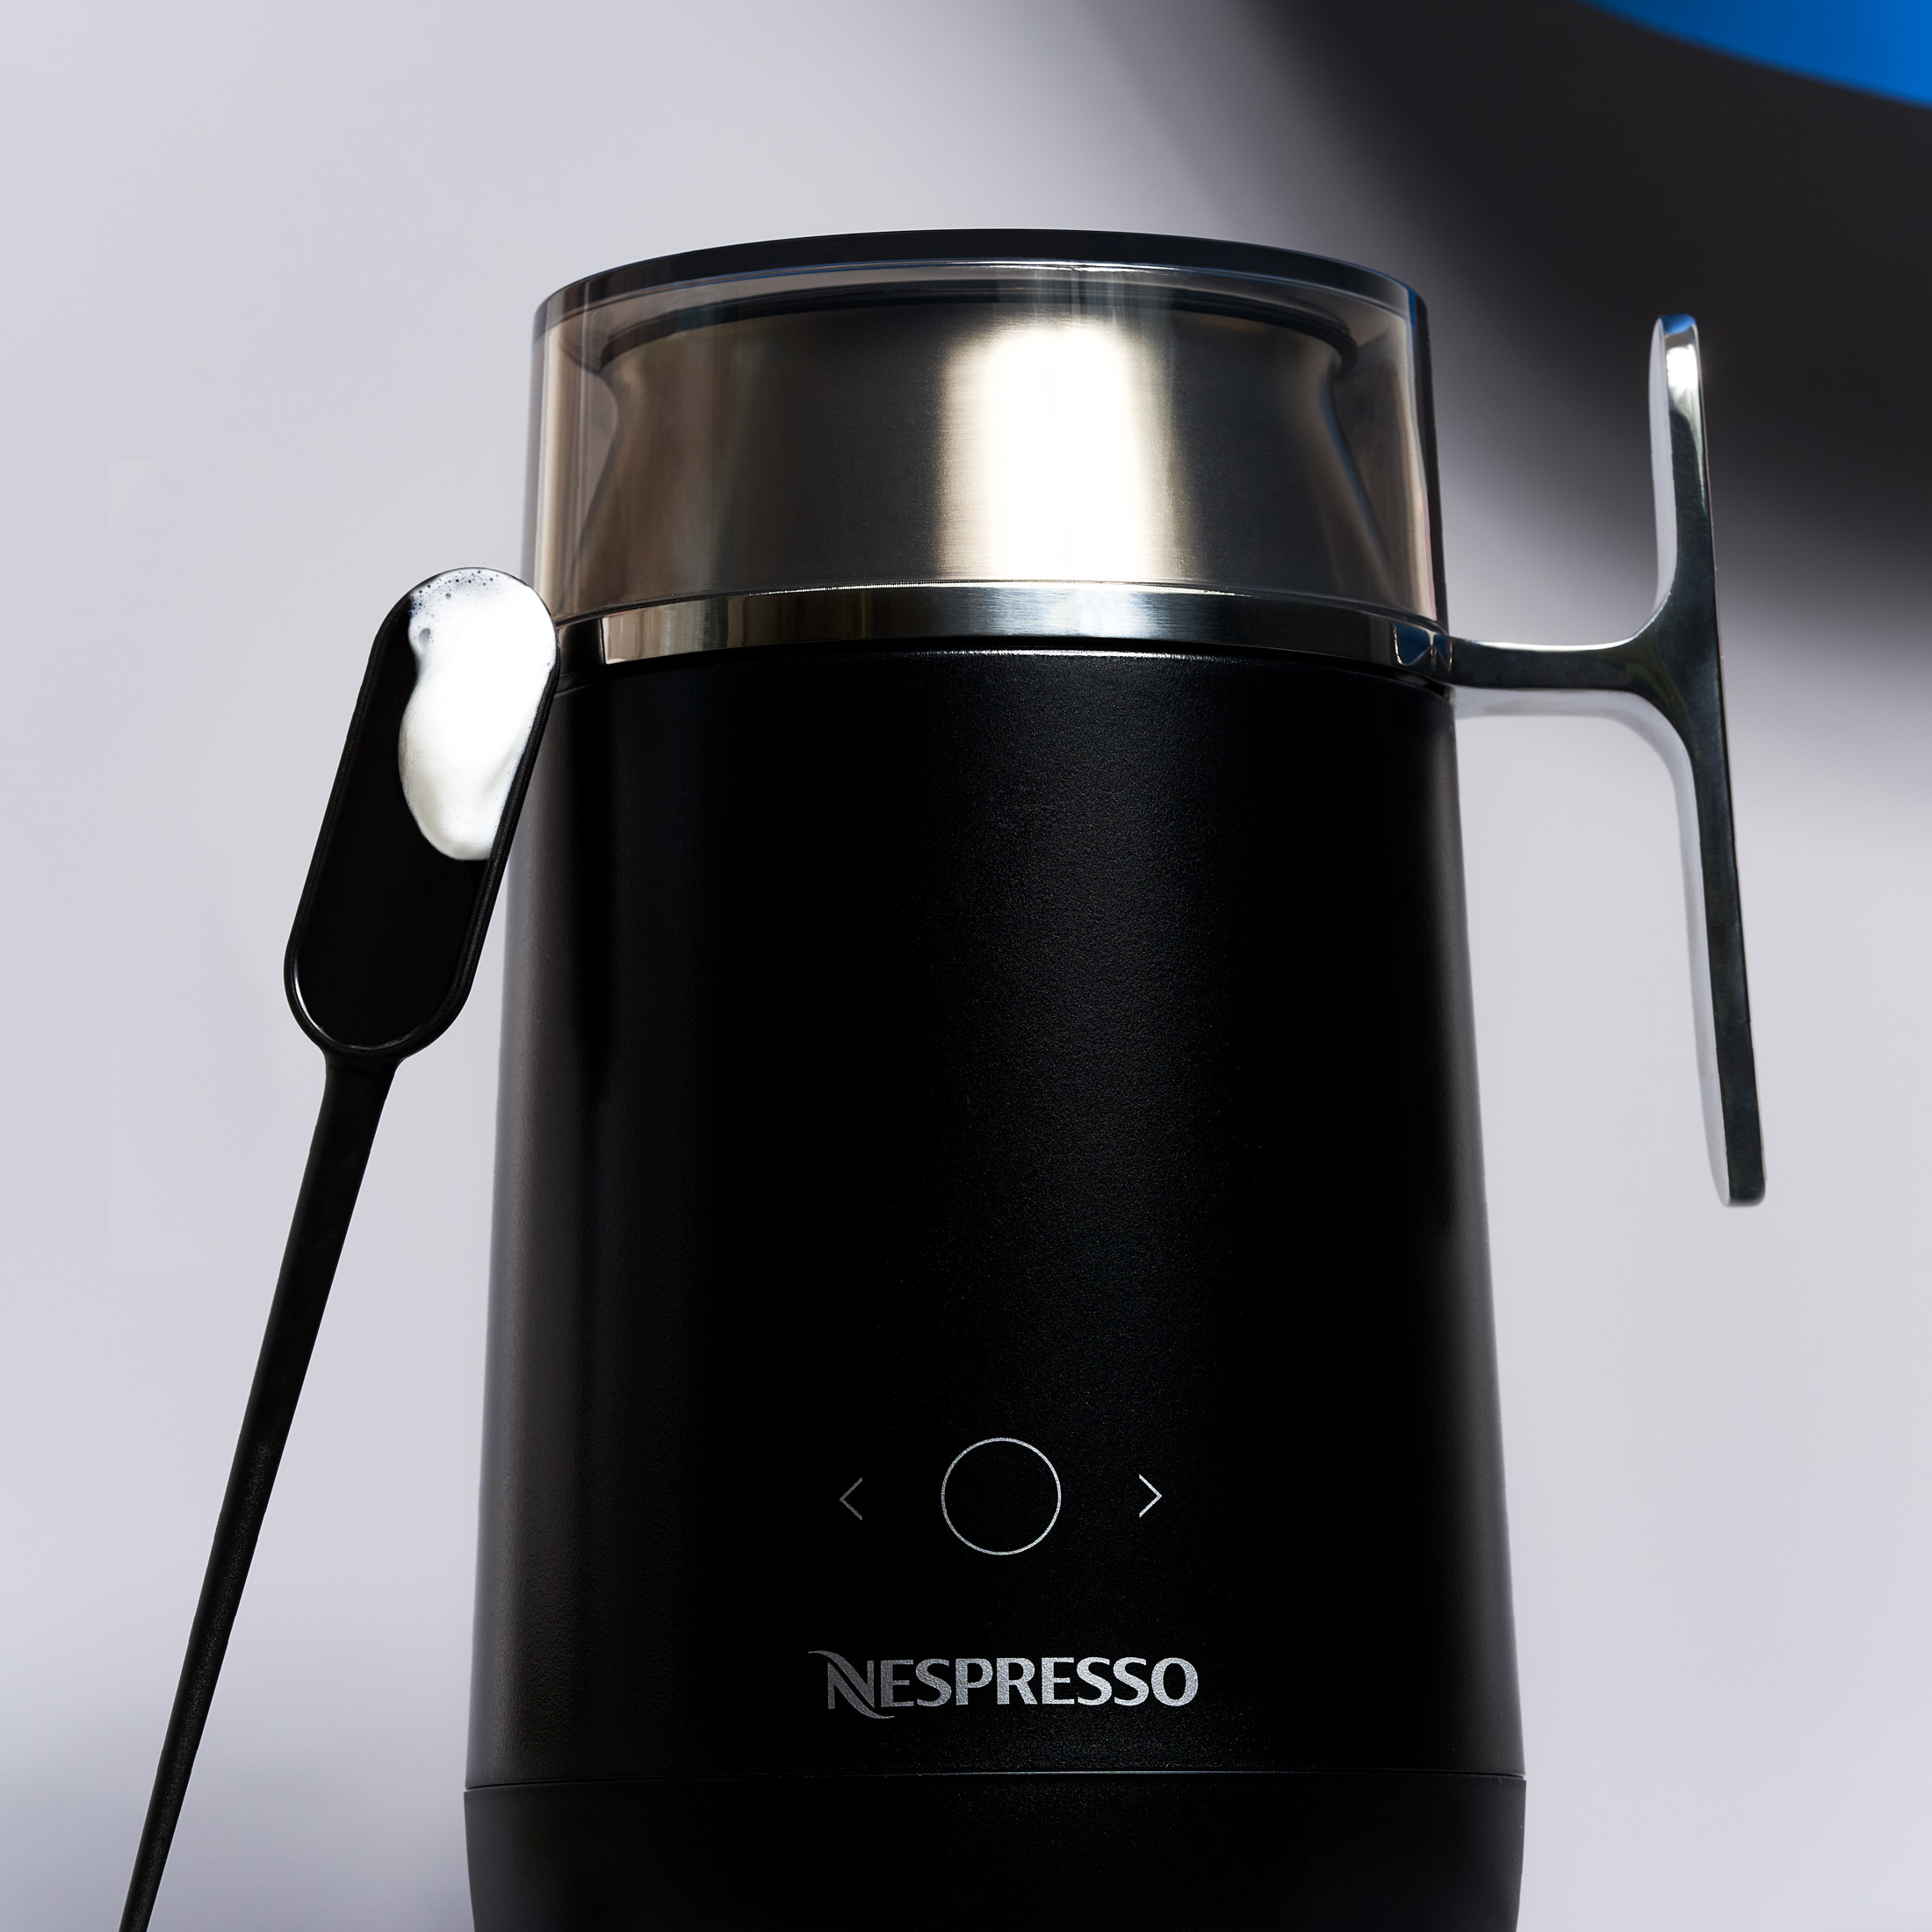 Nespresso Barista Milk Frother Review: Cafe Coffee Drinks at Home